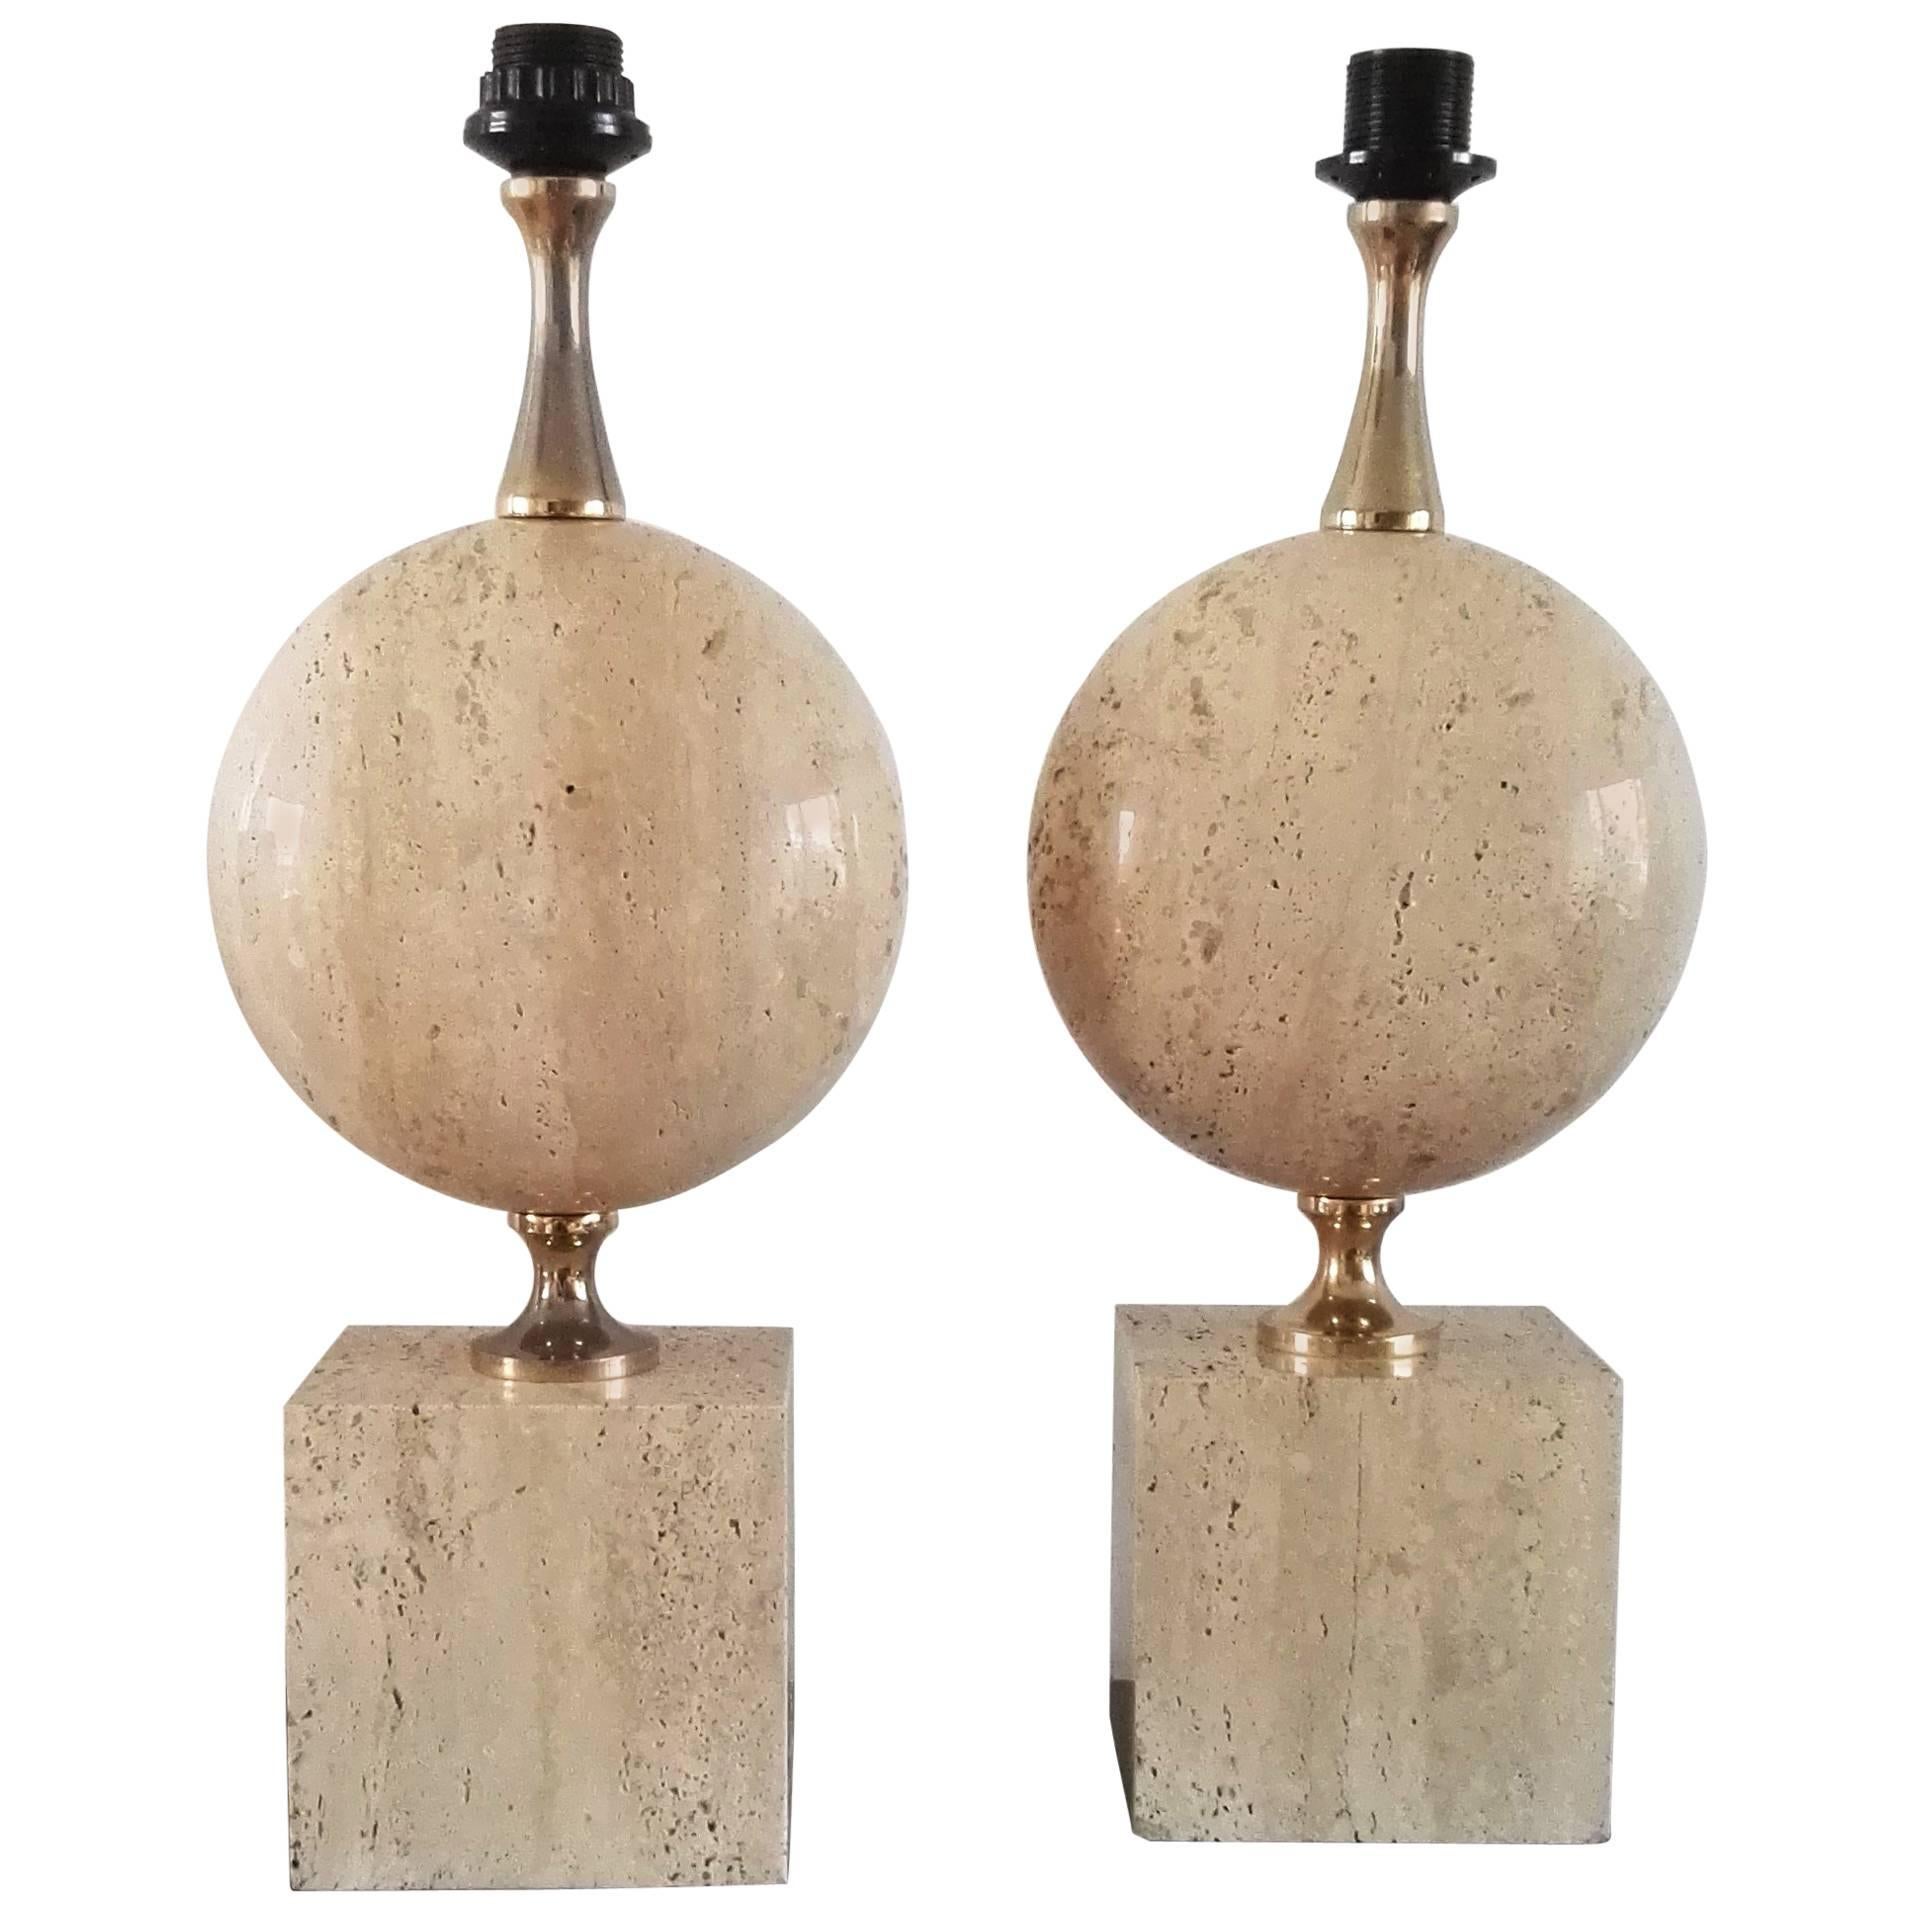 Pair of Large Solid Travertine Table Lamp by Maison Barbier, France, 1970s